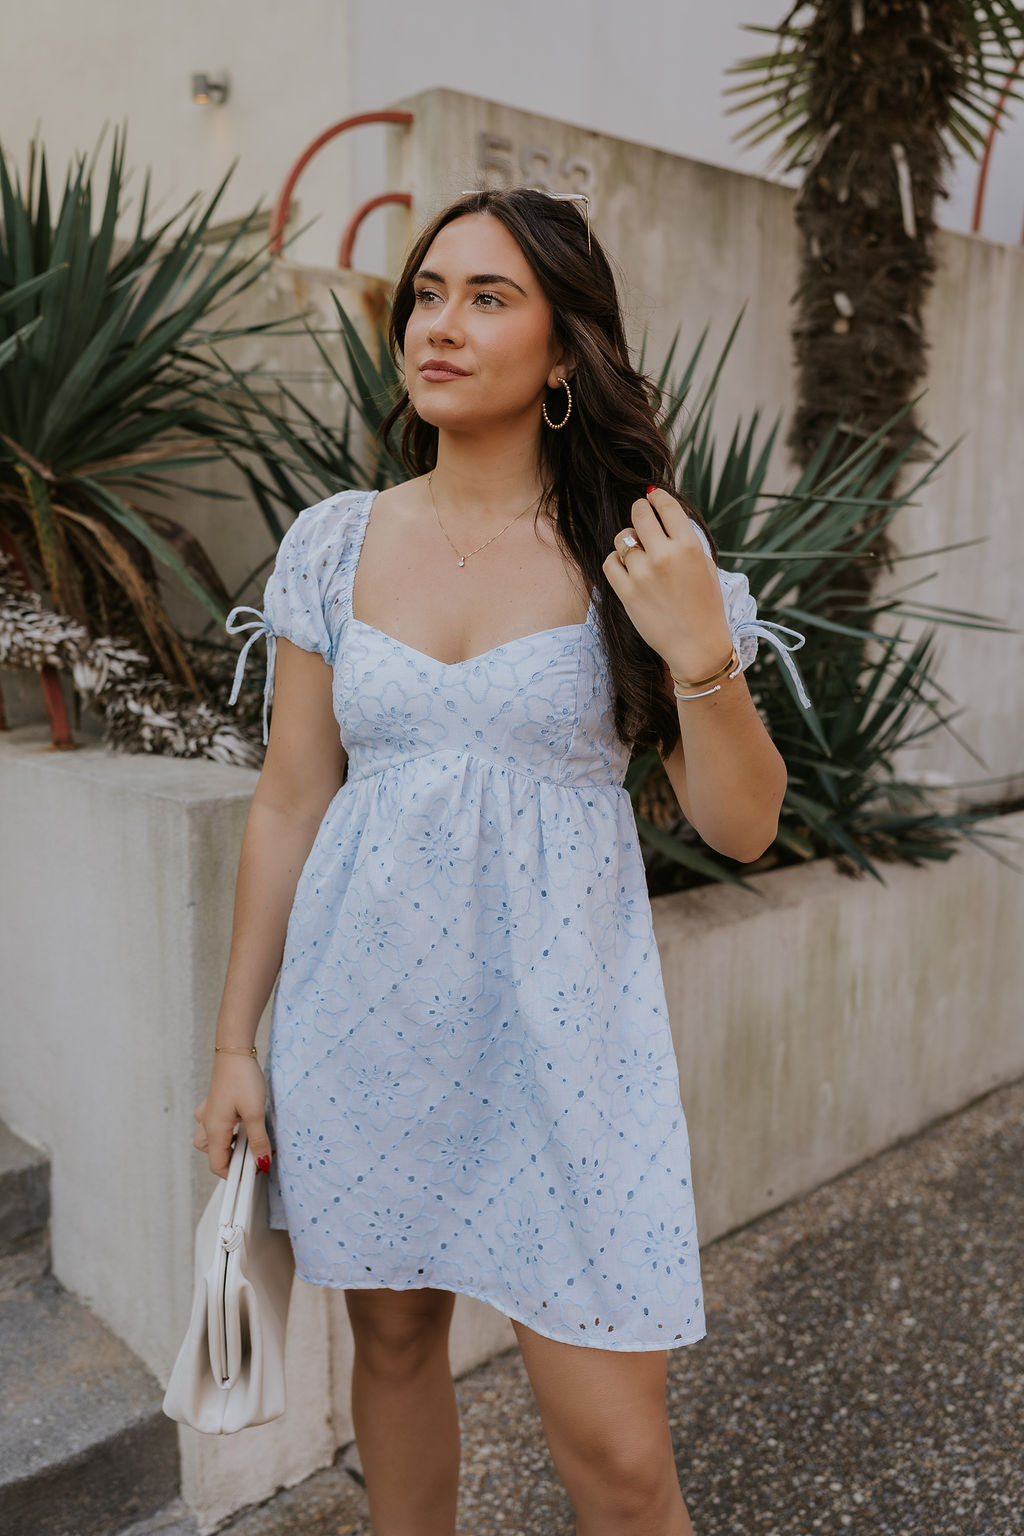 Front view of female model wearing the The Ella Light Blue Eyelet Mini Dress which features light blue cotton fabric with an eyelet floral pattern, mini length, light blue lining, a sweetheart neckline, short puff sleeves with tie details, and a smocked back.